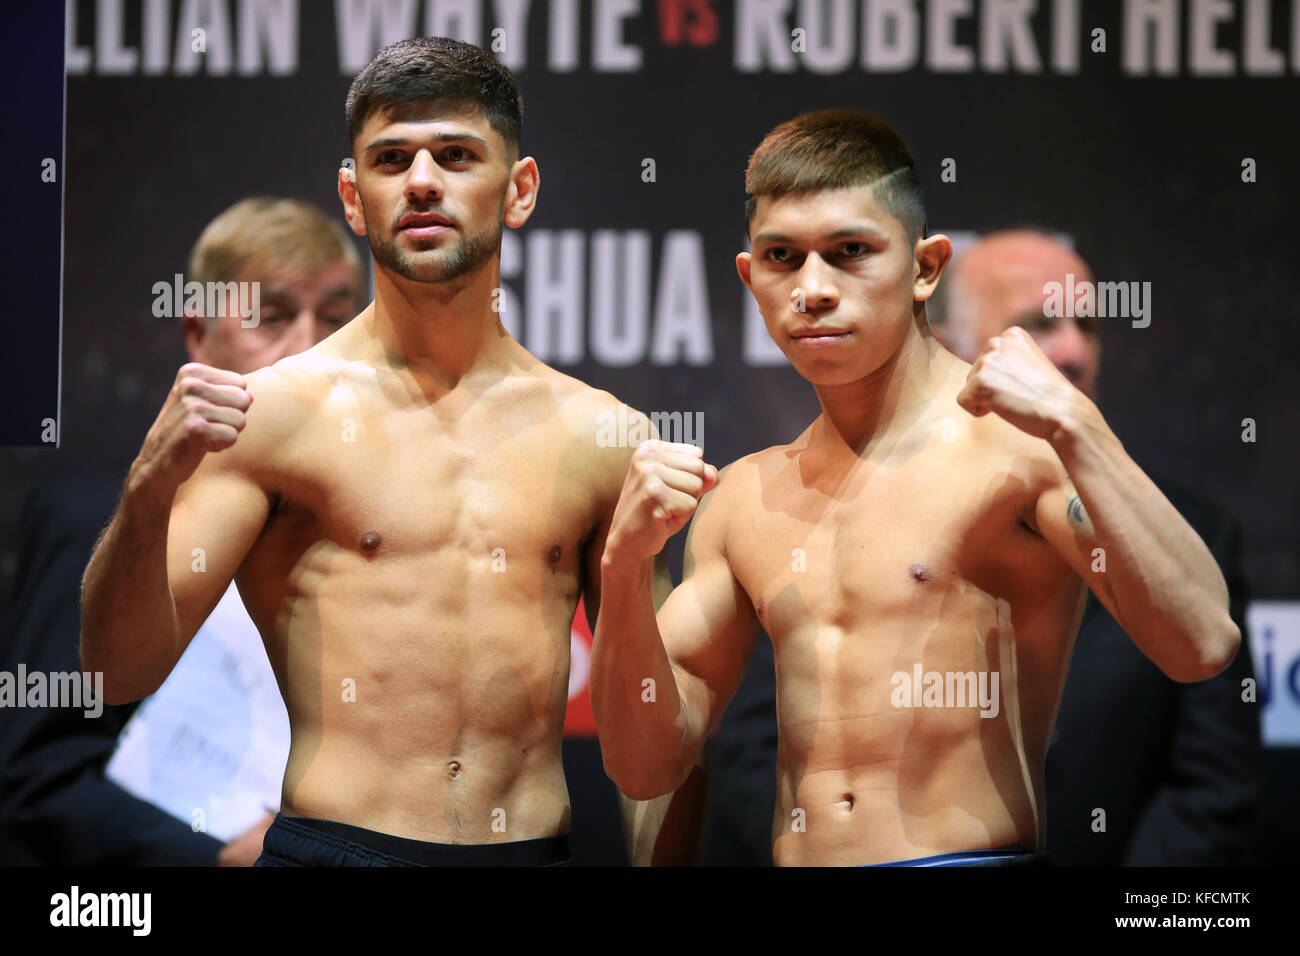 Joe Cordina (left) and Lesther Cantillano during the weigh-in at Motorpoint Arena Cardiff. PRESS ASSOCIATION Photo. Picture date: Friday October 27, 2017. See PA story BOXING Cardiff. Photo credit should read: Nick Potts/PA Wire Stock Photo